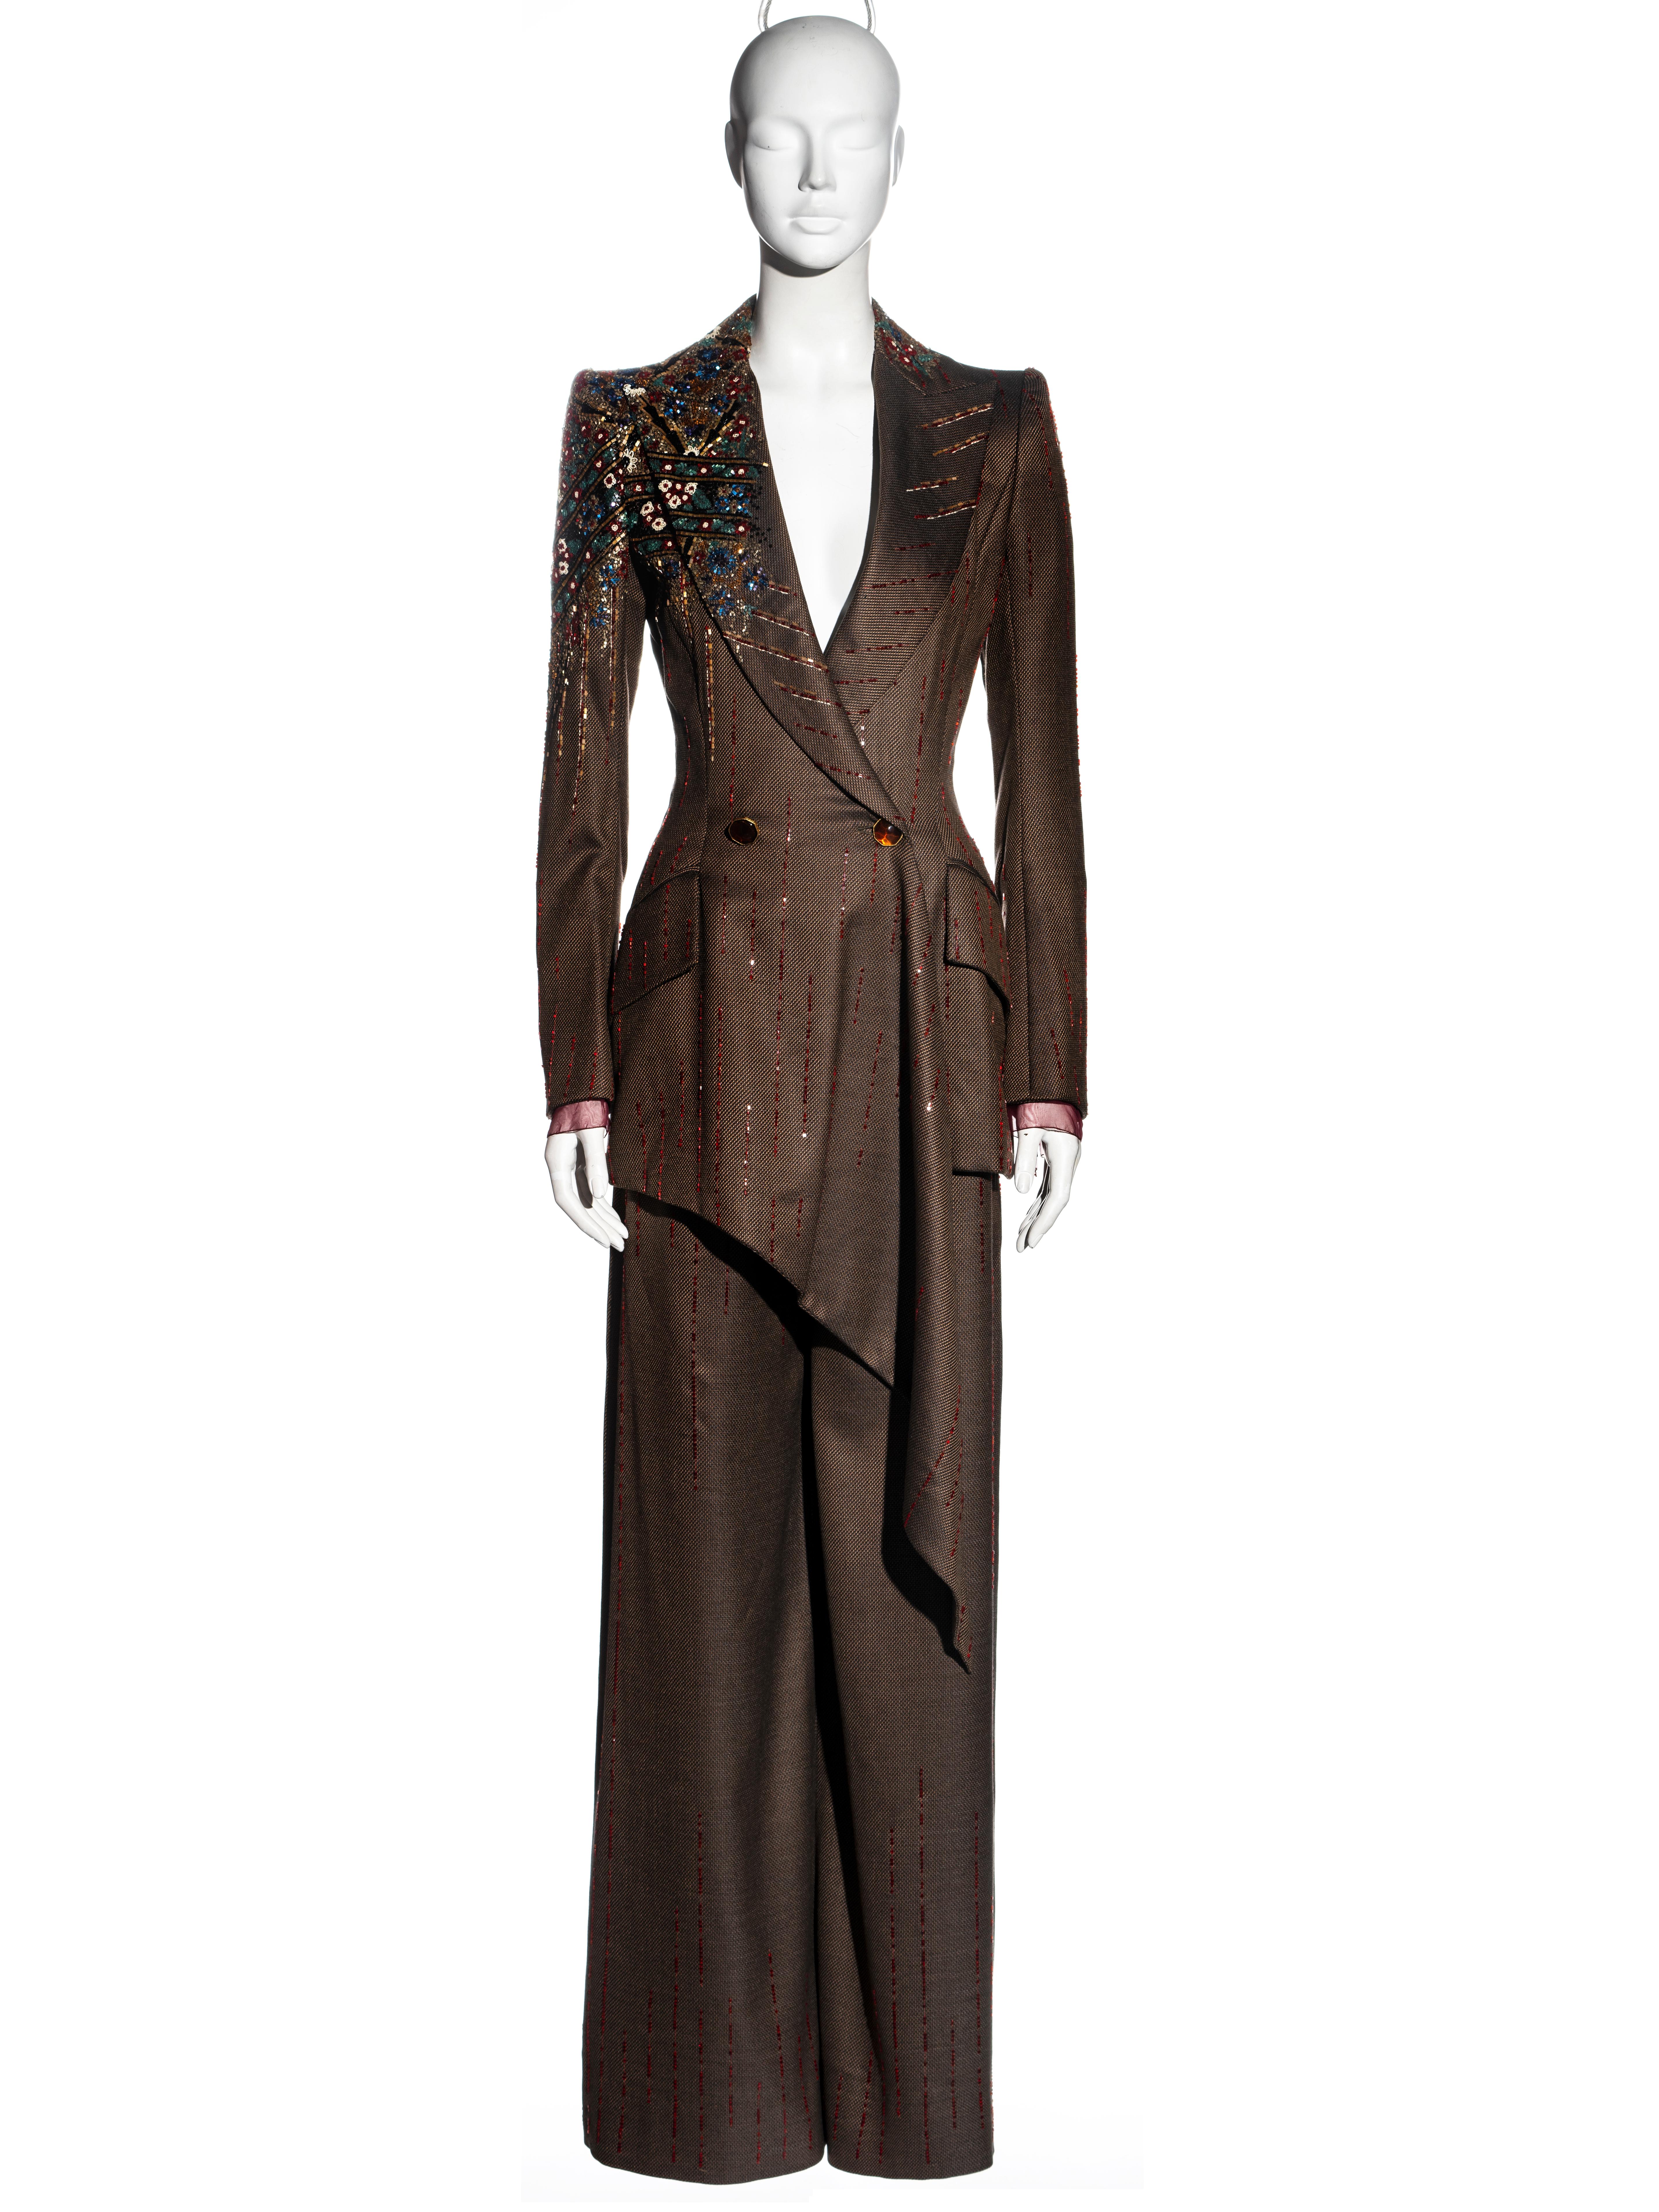 ▪ Jean-Louis Scherrer brown wool trouser suit
▪ Designed by Stephane Rolland 
▪ Double-breasted blazer jacket 
▪ Heavily beaded right shoulder
▪ Asymmetric hemline 
▪ Red beaded pinstripes 
▪ Large amber stone buttons
▪ Wide-leg pants
▪ Fall-Winter